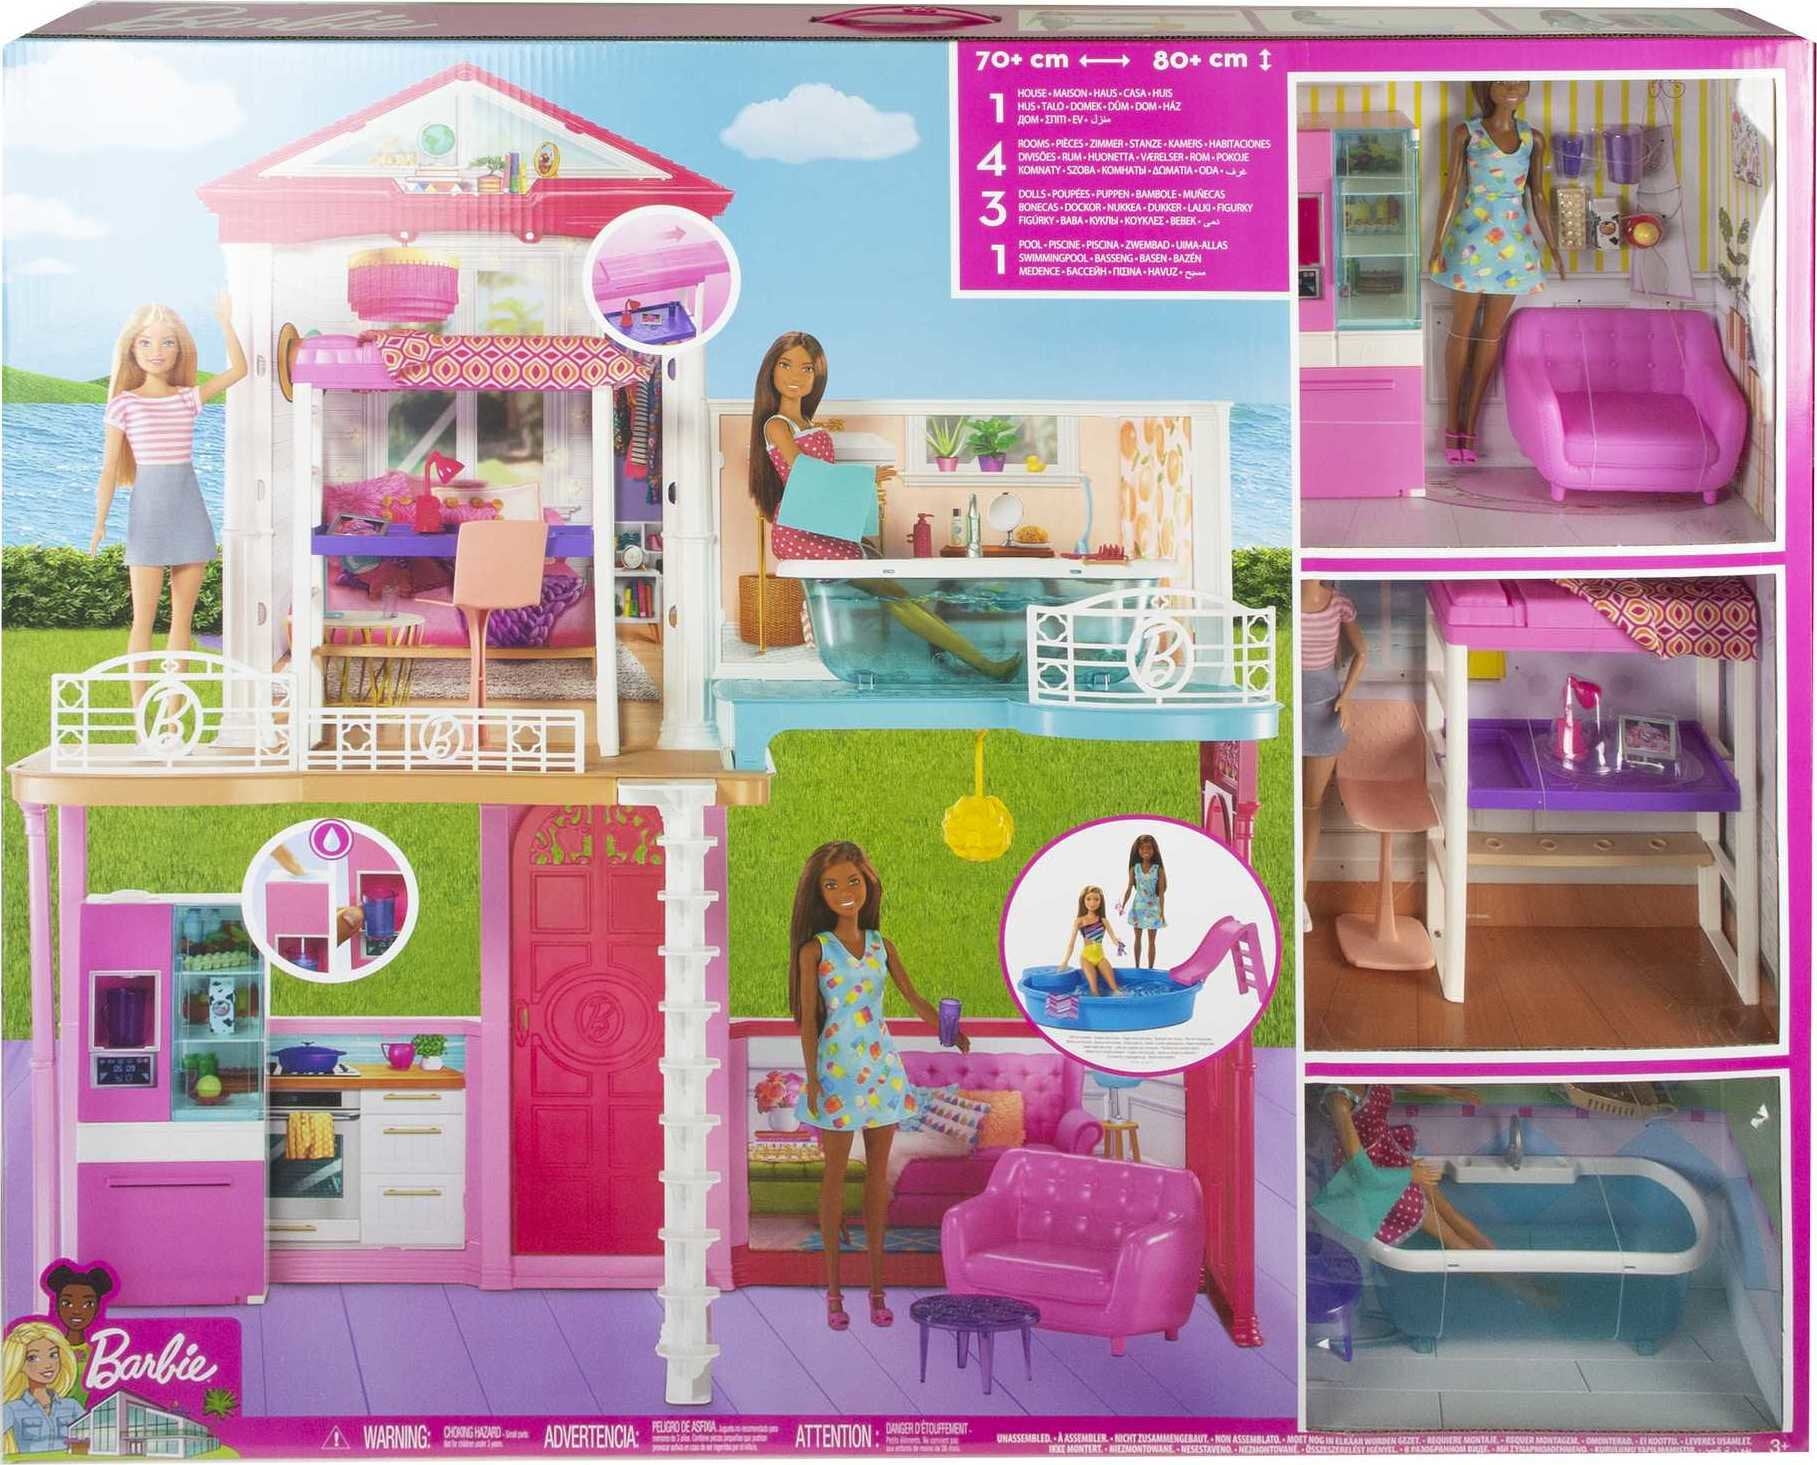 Barbie Doll House Playset, Multicolor